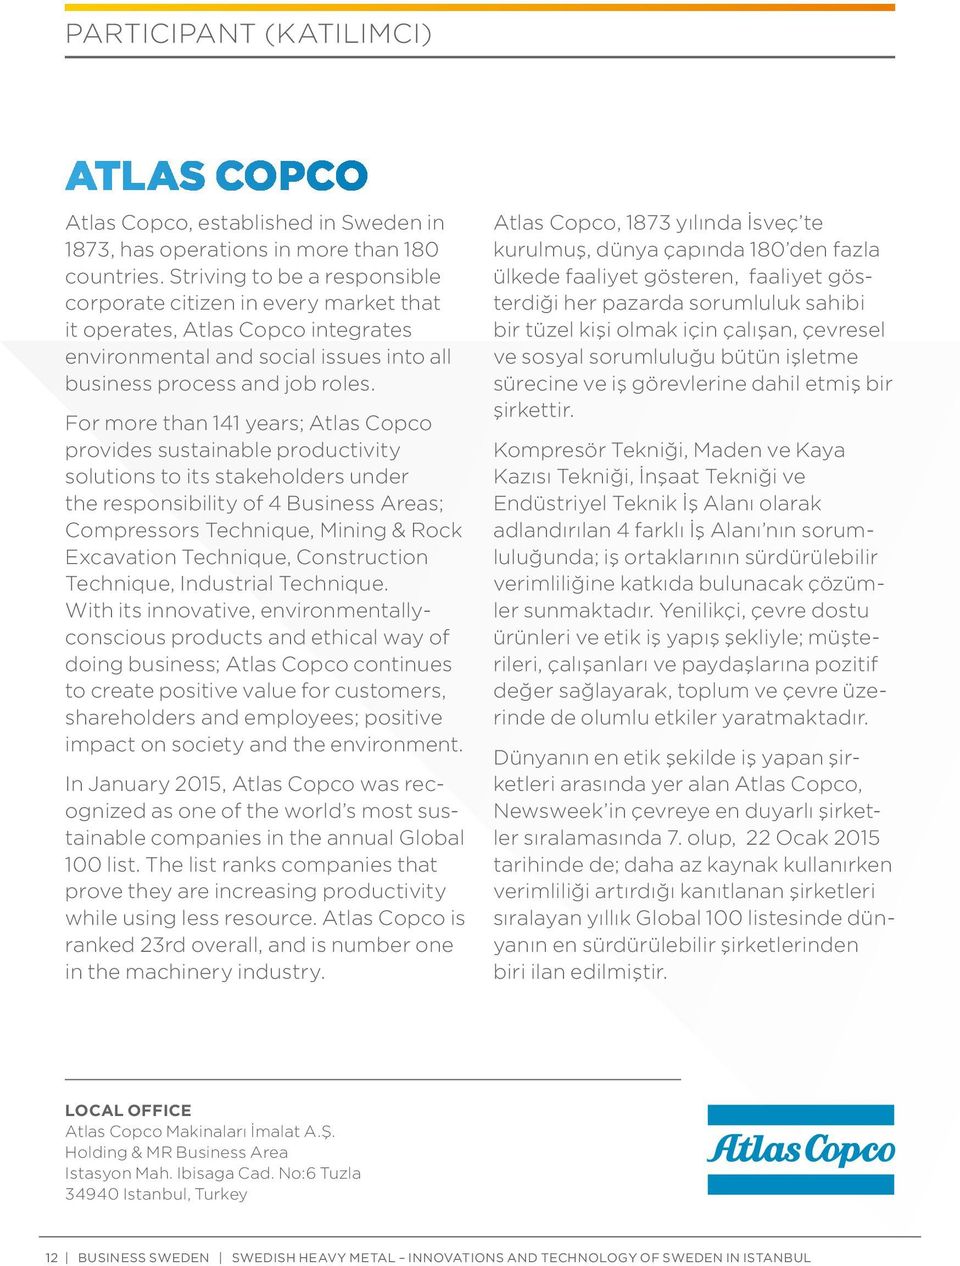 For more than 141 years; Atlas Copco provides sustainable productivity solutions to its stakeholders under the responsibility of 4 Business Areas; Compressors Technique, Mining & Rock Excavation